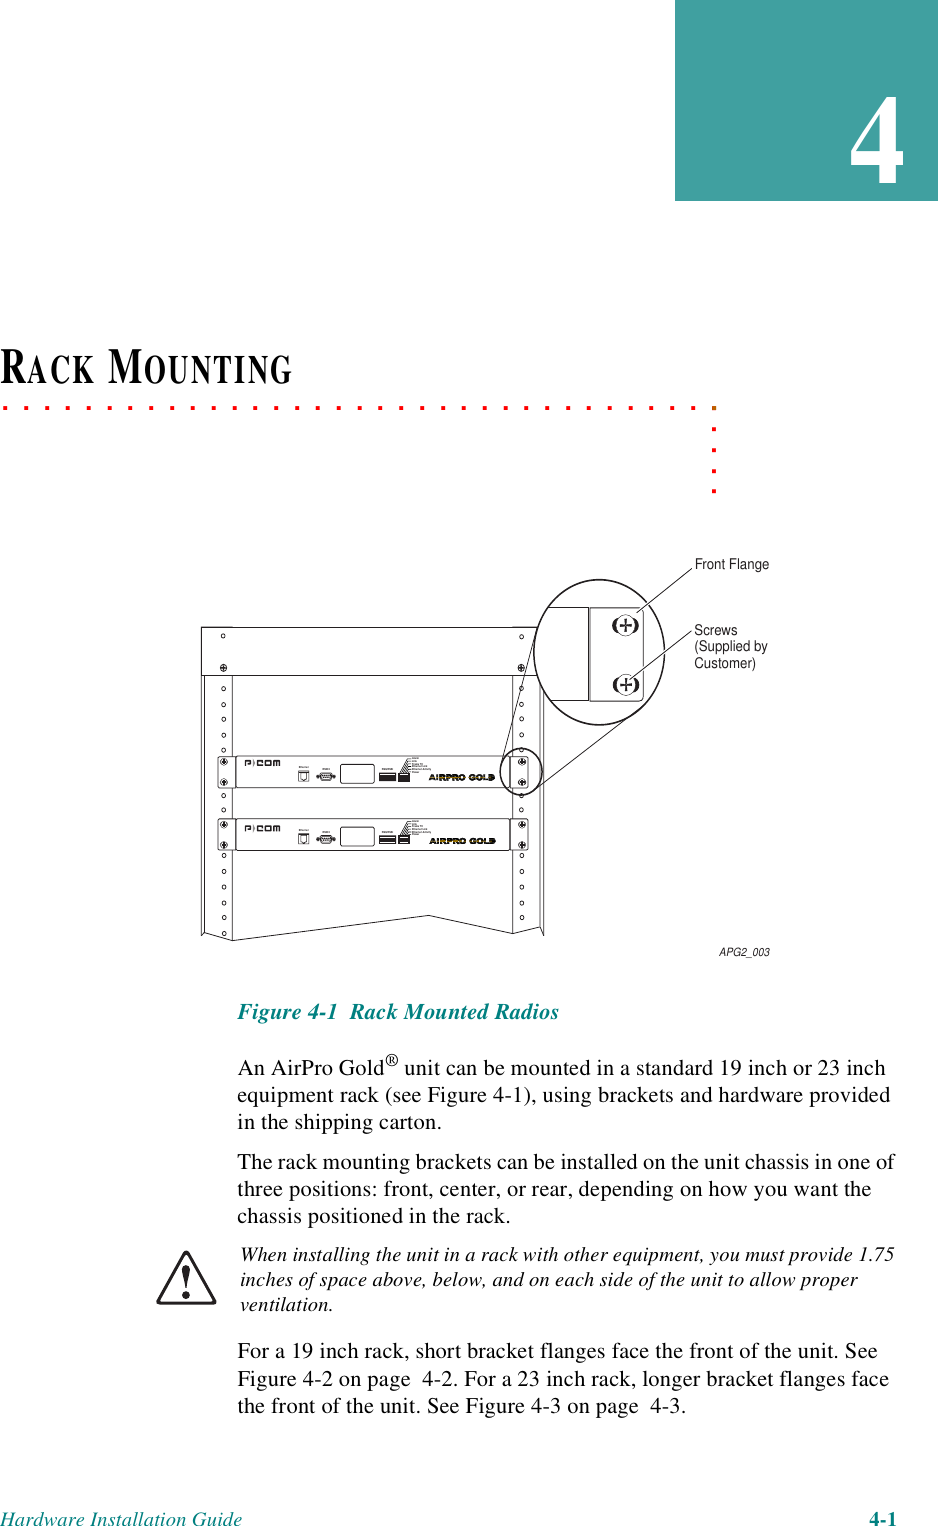 Hardware Installation Guide 4-14. . . . .. . . . . . . . . . . . . . . . . . . . . . . . . . . . . . . . . . .RACK MOUNTINGFigure 4-1  Rack Mounted RadiosAn AirPro Gold® unit can be mounted in a standard 19 inch or 23 inch equipment rack (see Figure 4-1), using brackets and hardware provided in the shipping carton.The rack mounting brackets can be installed on the unit chassis in one of three positions: front, center, or rear, depending on how you want the chassis positioned in the rack. When installing the unit in a rack with other equipment, you must provide 1.75 inches of space above, below, and on each side of the unit to allow proper ventilation.For a 19 inch rack, short bracket flanges face the front of the unit. See Figure 4-2 on page  4-2. For a 23 inch rack, longer bracket flanges face the front of the unit. See Figure 4-3 on page  4-3.Front FlangeScrews(Supplied byCustomer)APG2_003Ethernet RS232 RSQ/RSSIAlarmLinkFrame TXEthernet LinkEthernet ActivityPowerEthernet RS232 RSQ/RSSIAlarmLinkFrame TXEthernet LinkEthernet ActivityPower